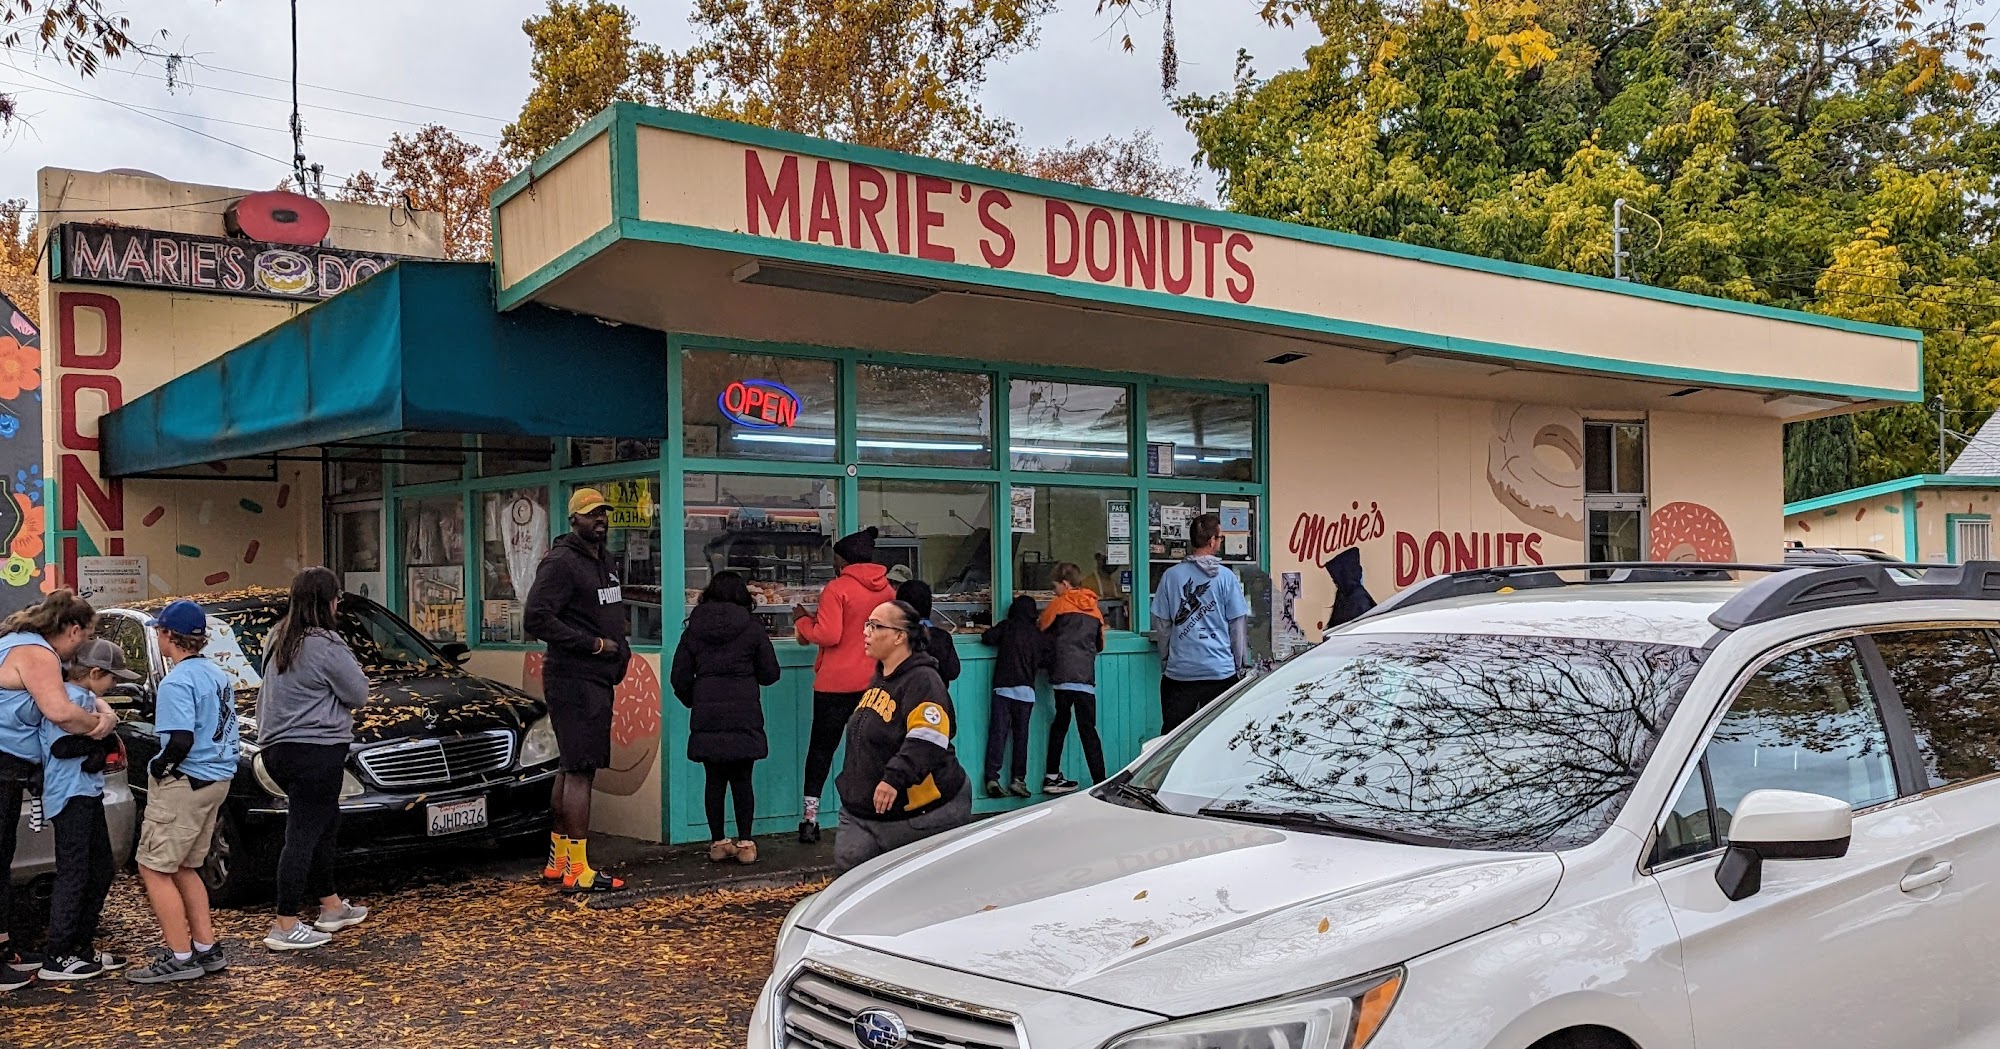 Marie's Donuts